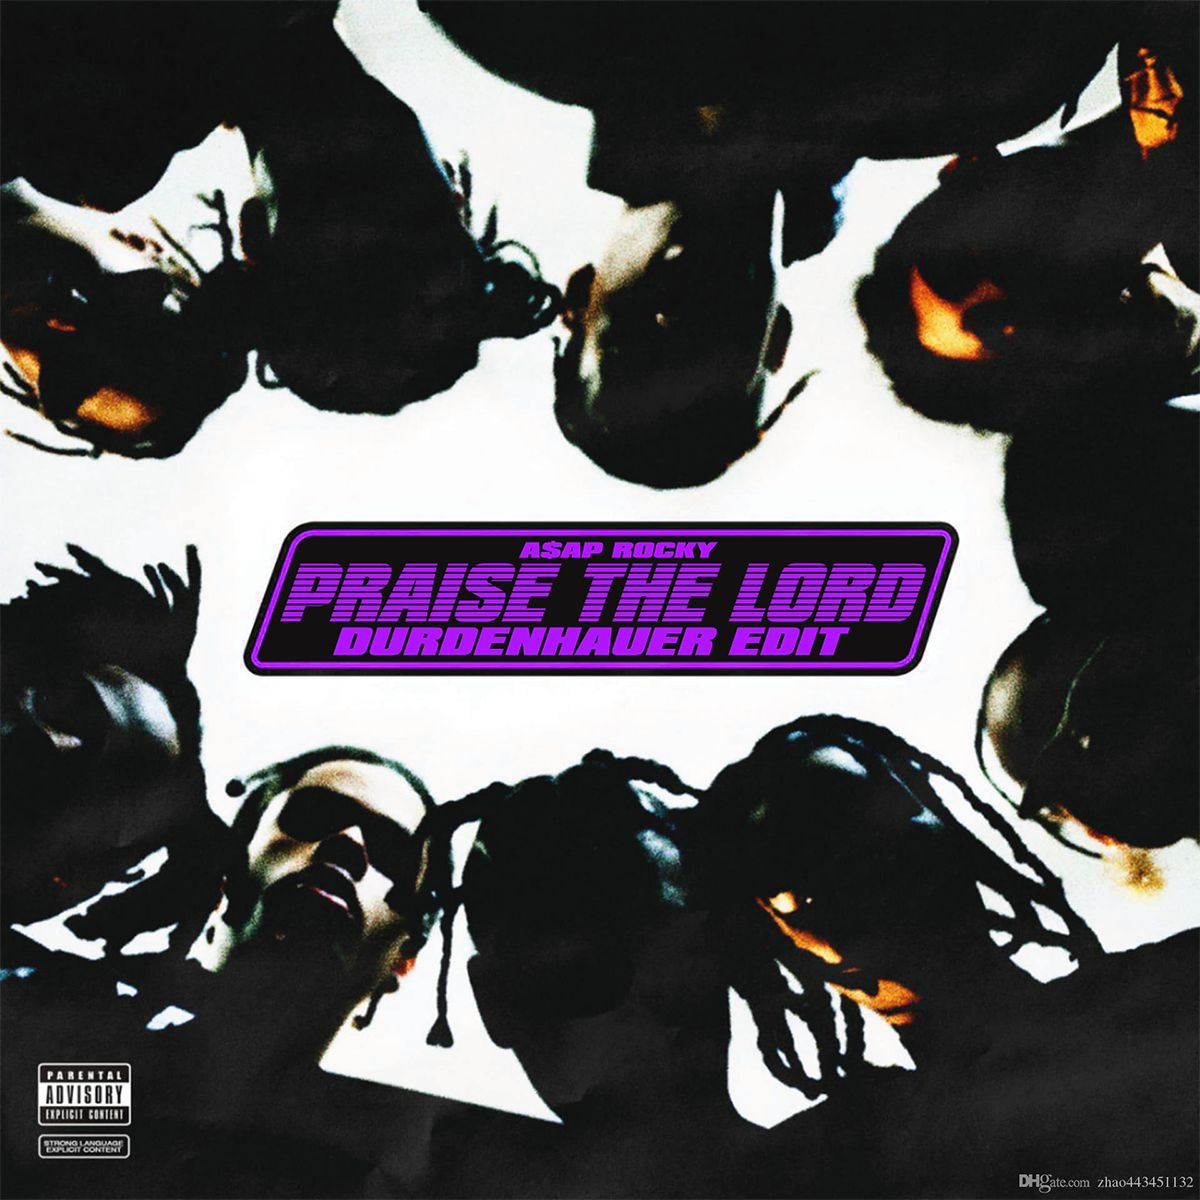 I-download A$AP ROCKY - Praise the Lord (DURDENHAUER Edit) [FREE DOWNLOAD]